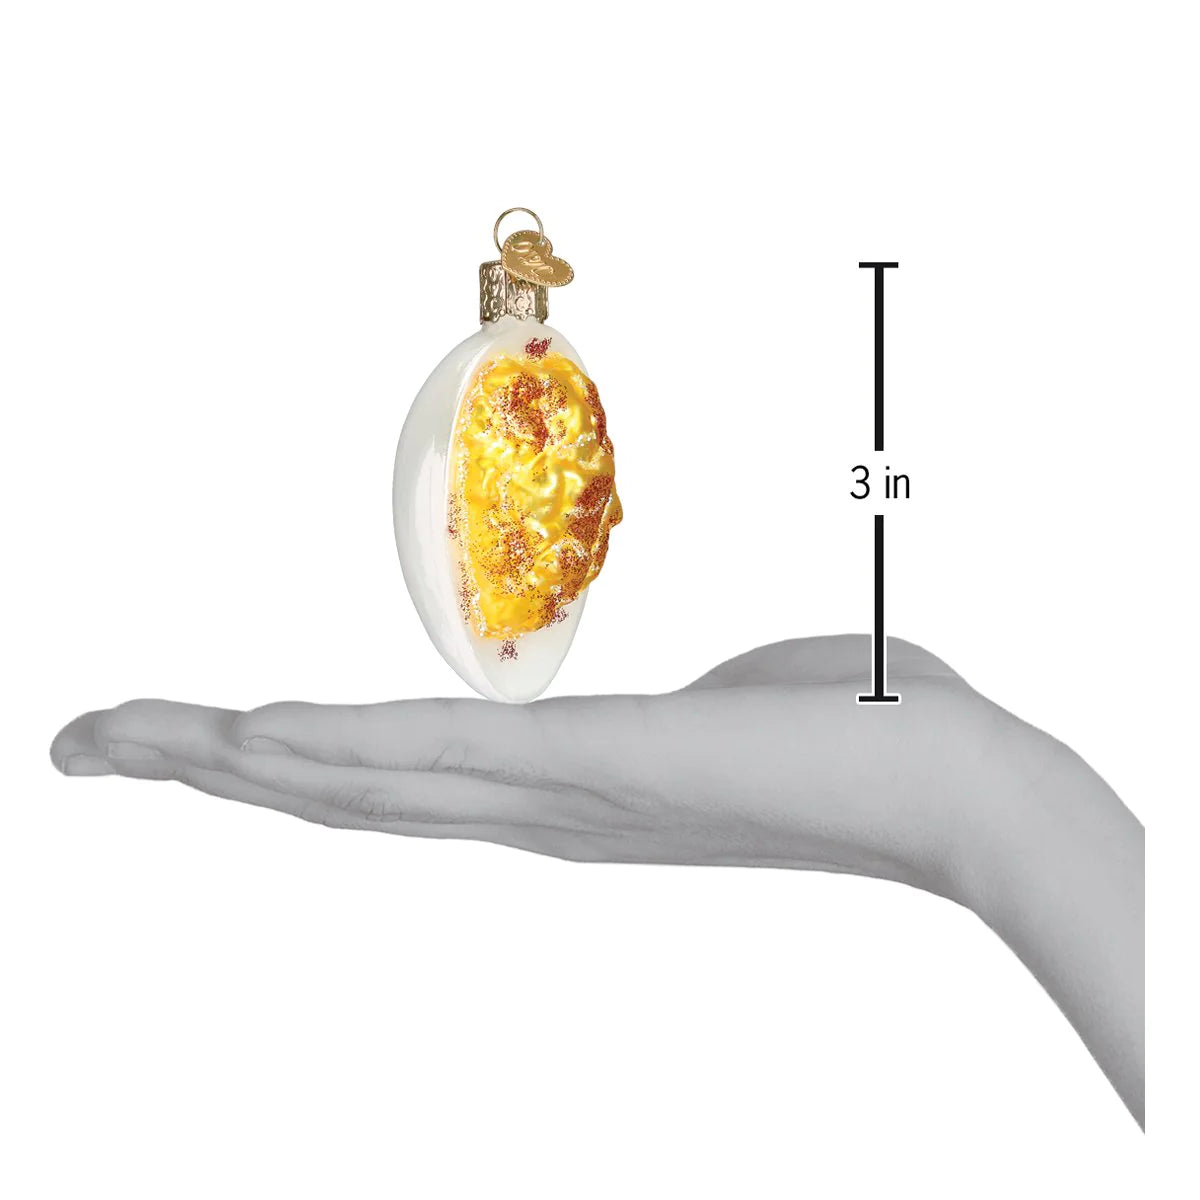 Old World Christmas Deviled Egg ornament dimensions 